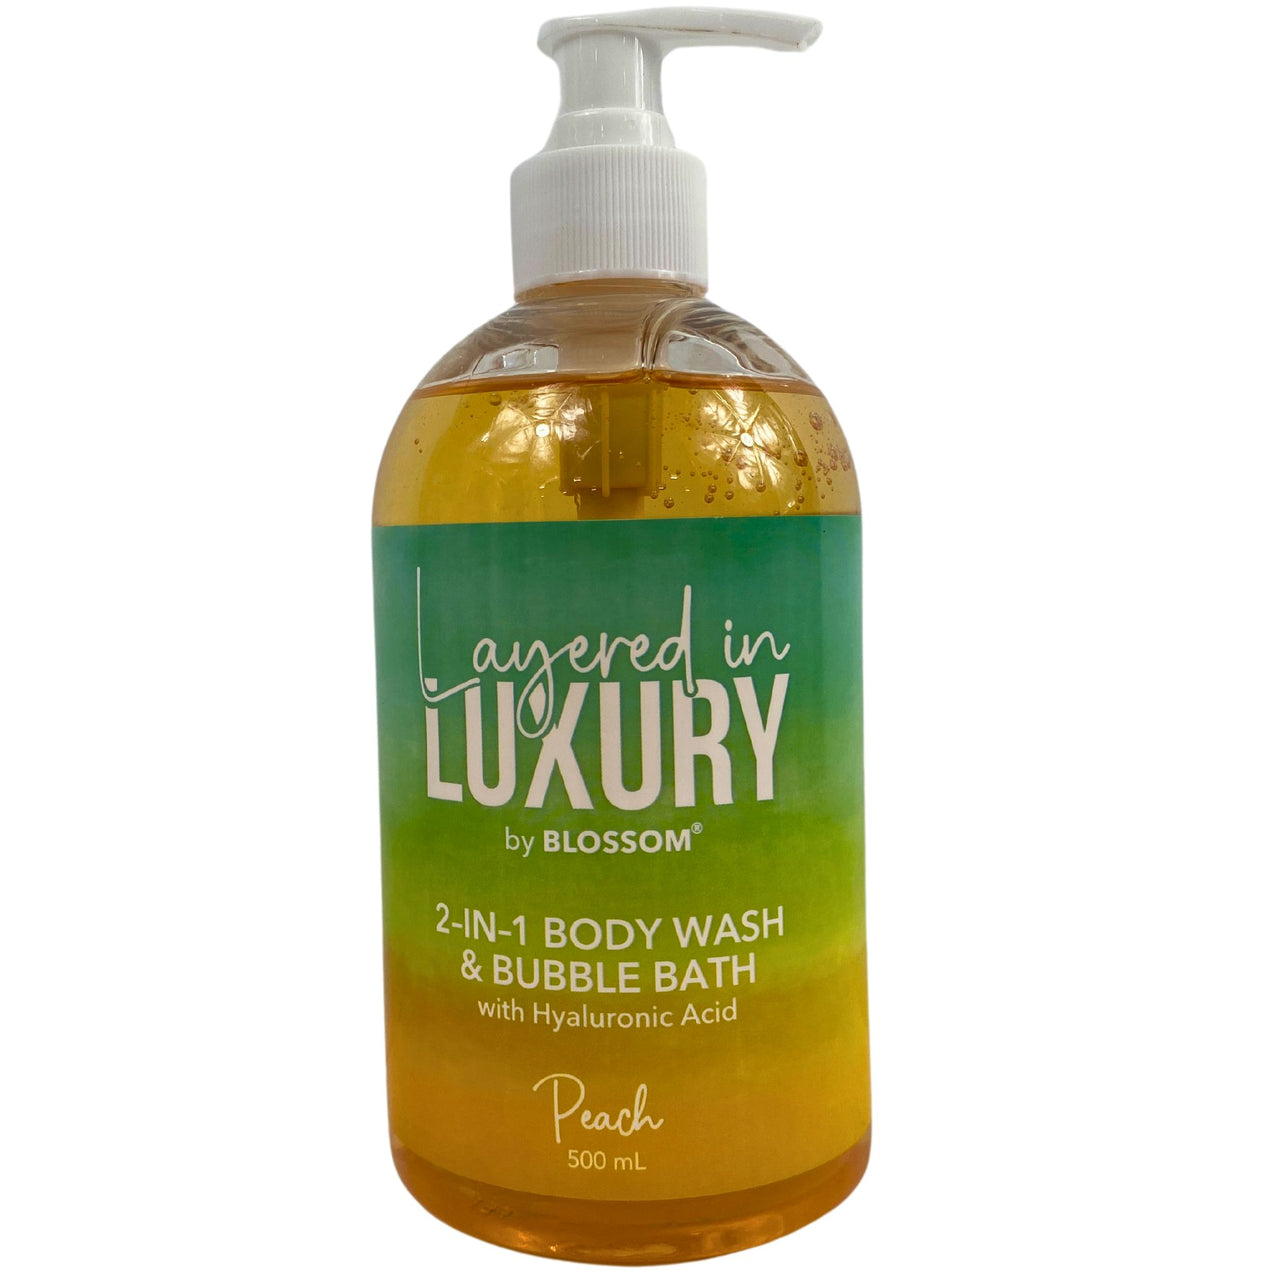 Layered in Luxury by Blossom 2-IN-1 Body Wash 